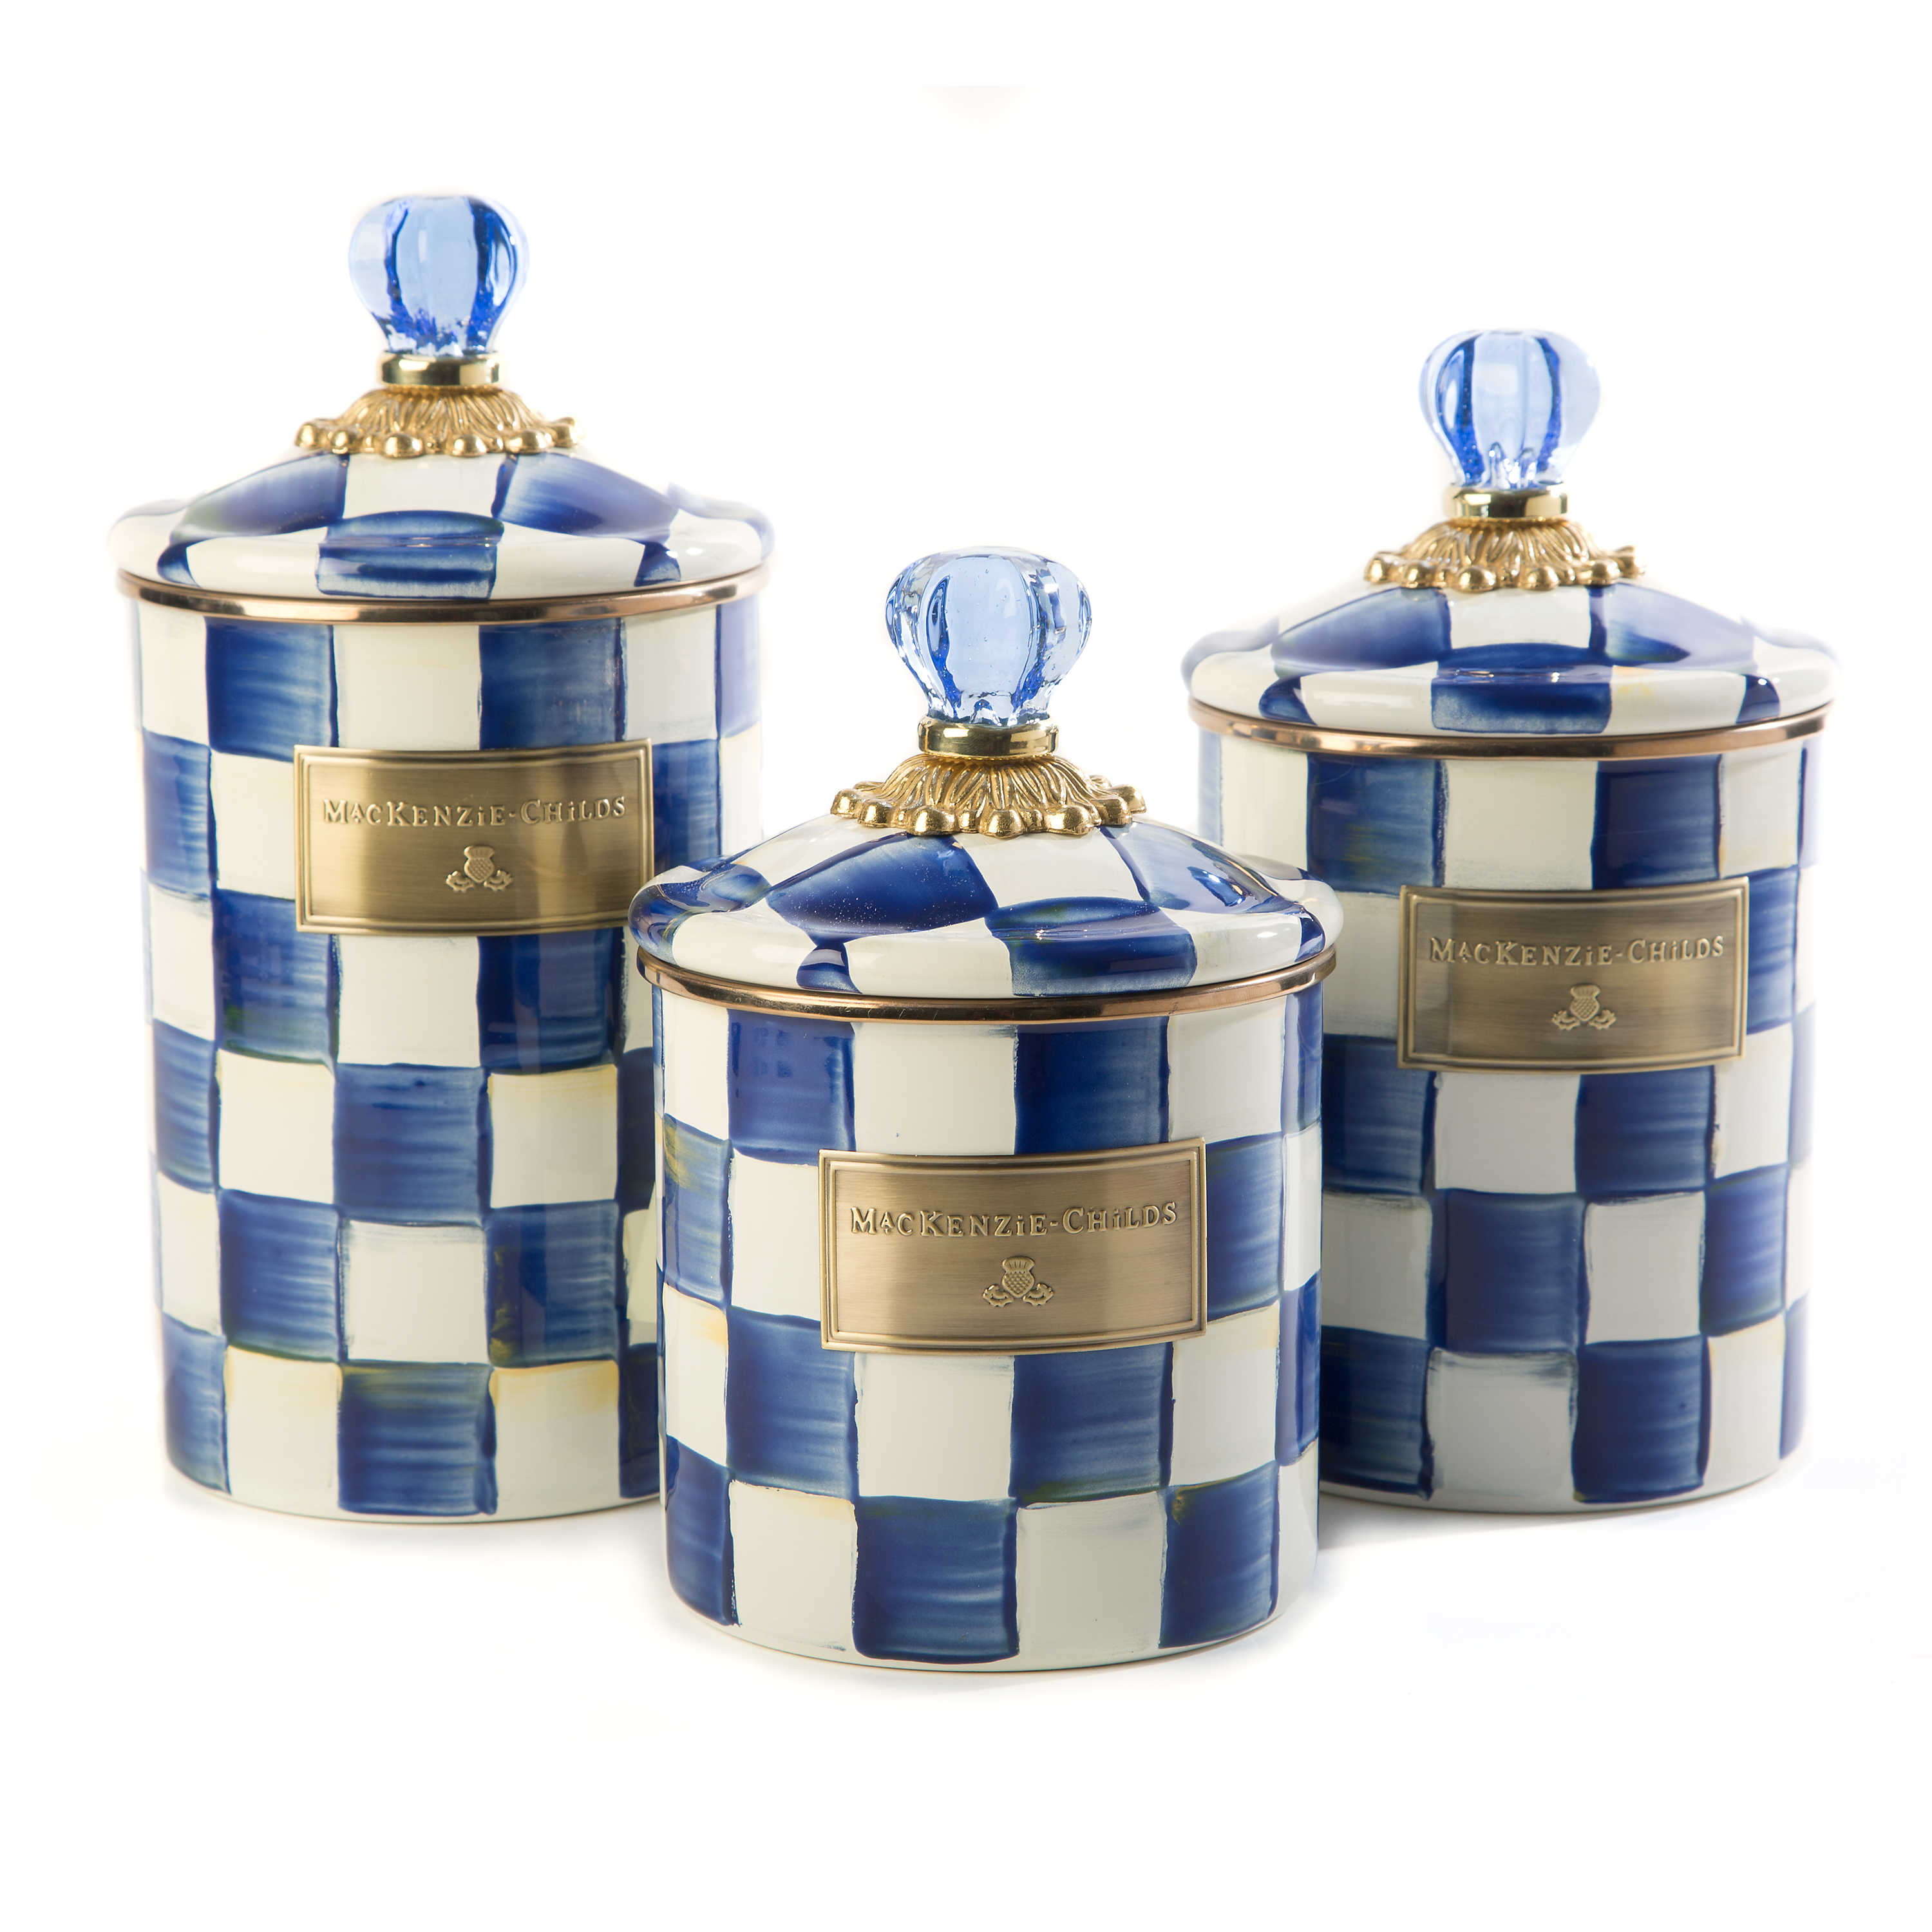 Royal Check Canisters, Set of 3 mackenzie-childs Panama 0